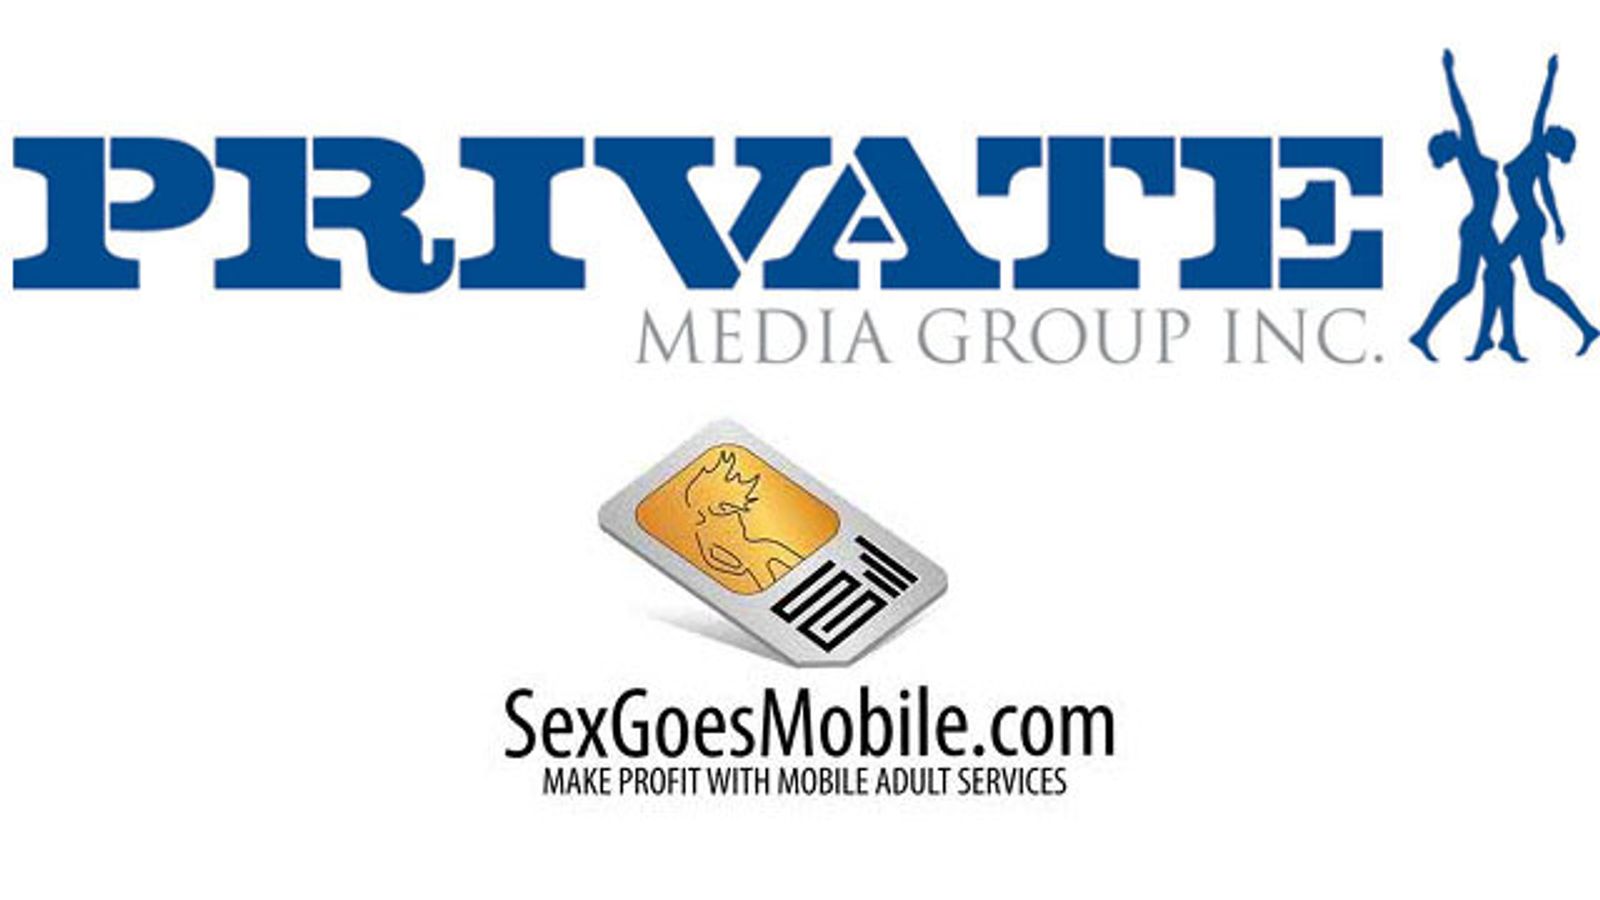 Private, SexGoesMobile Partner on Mobile Site in German